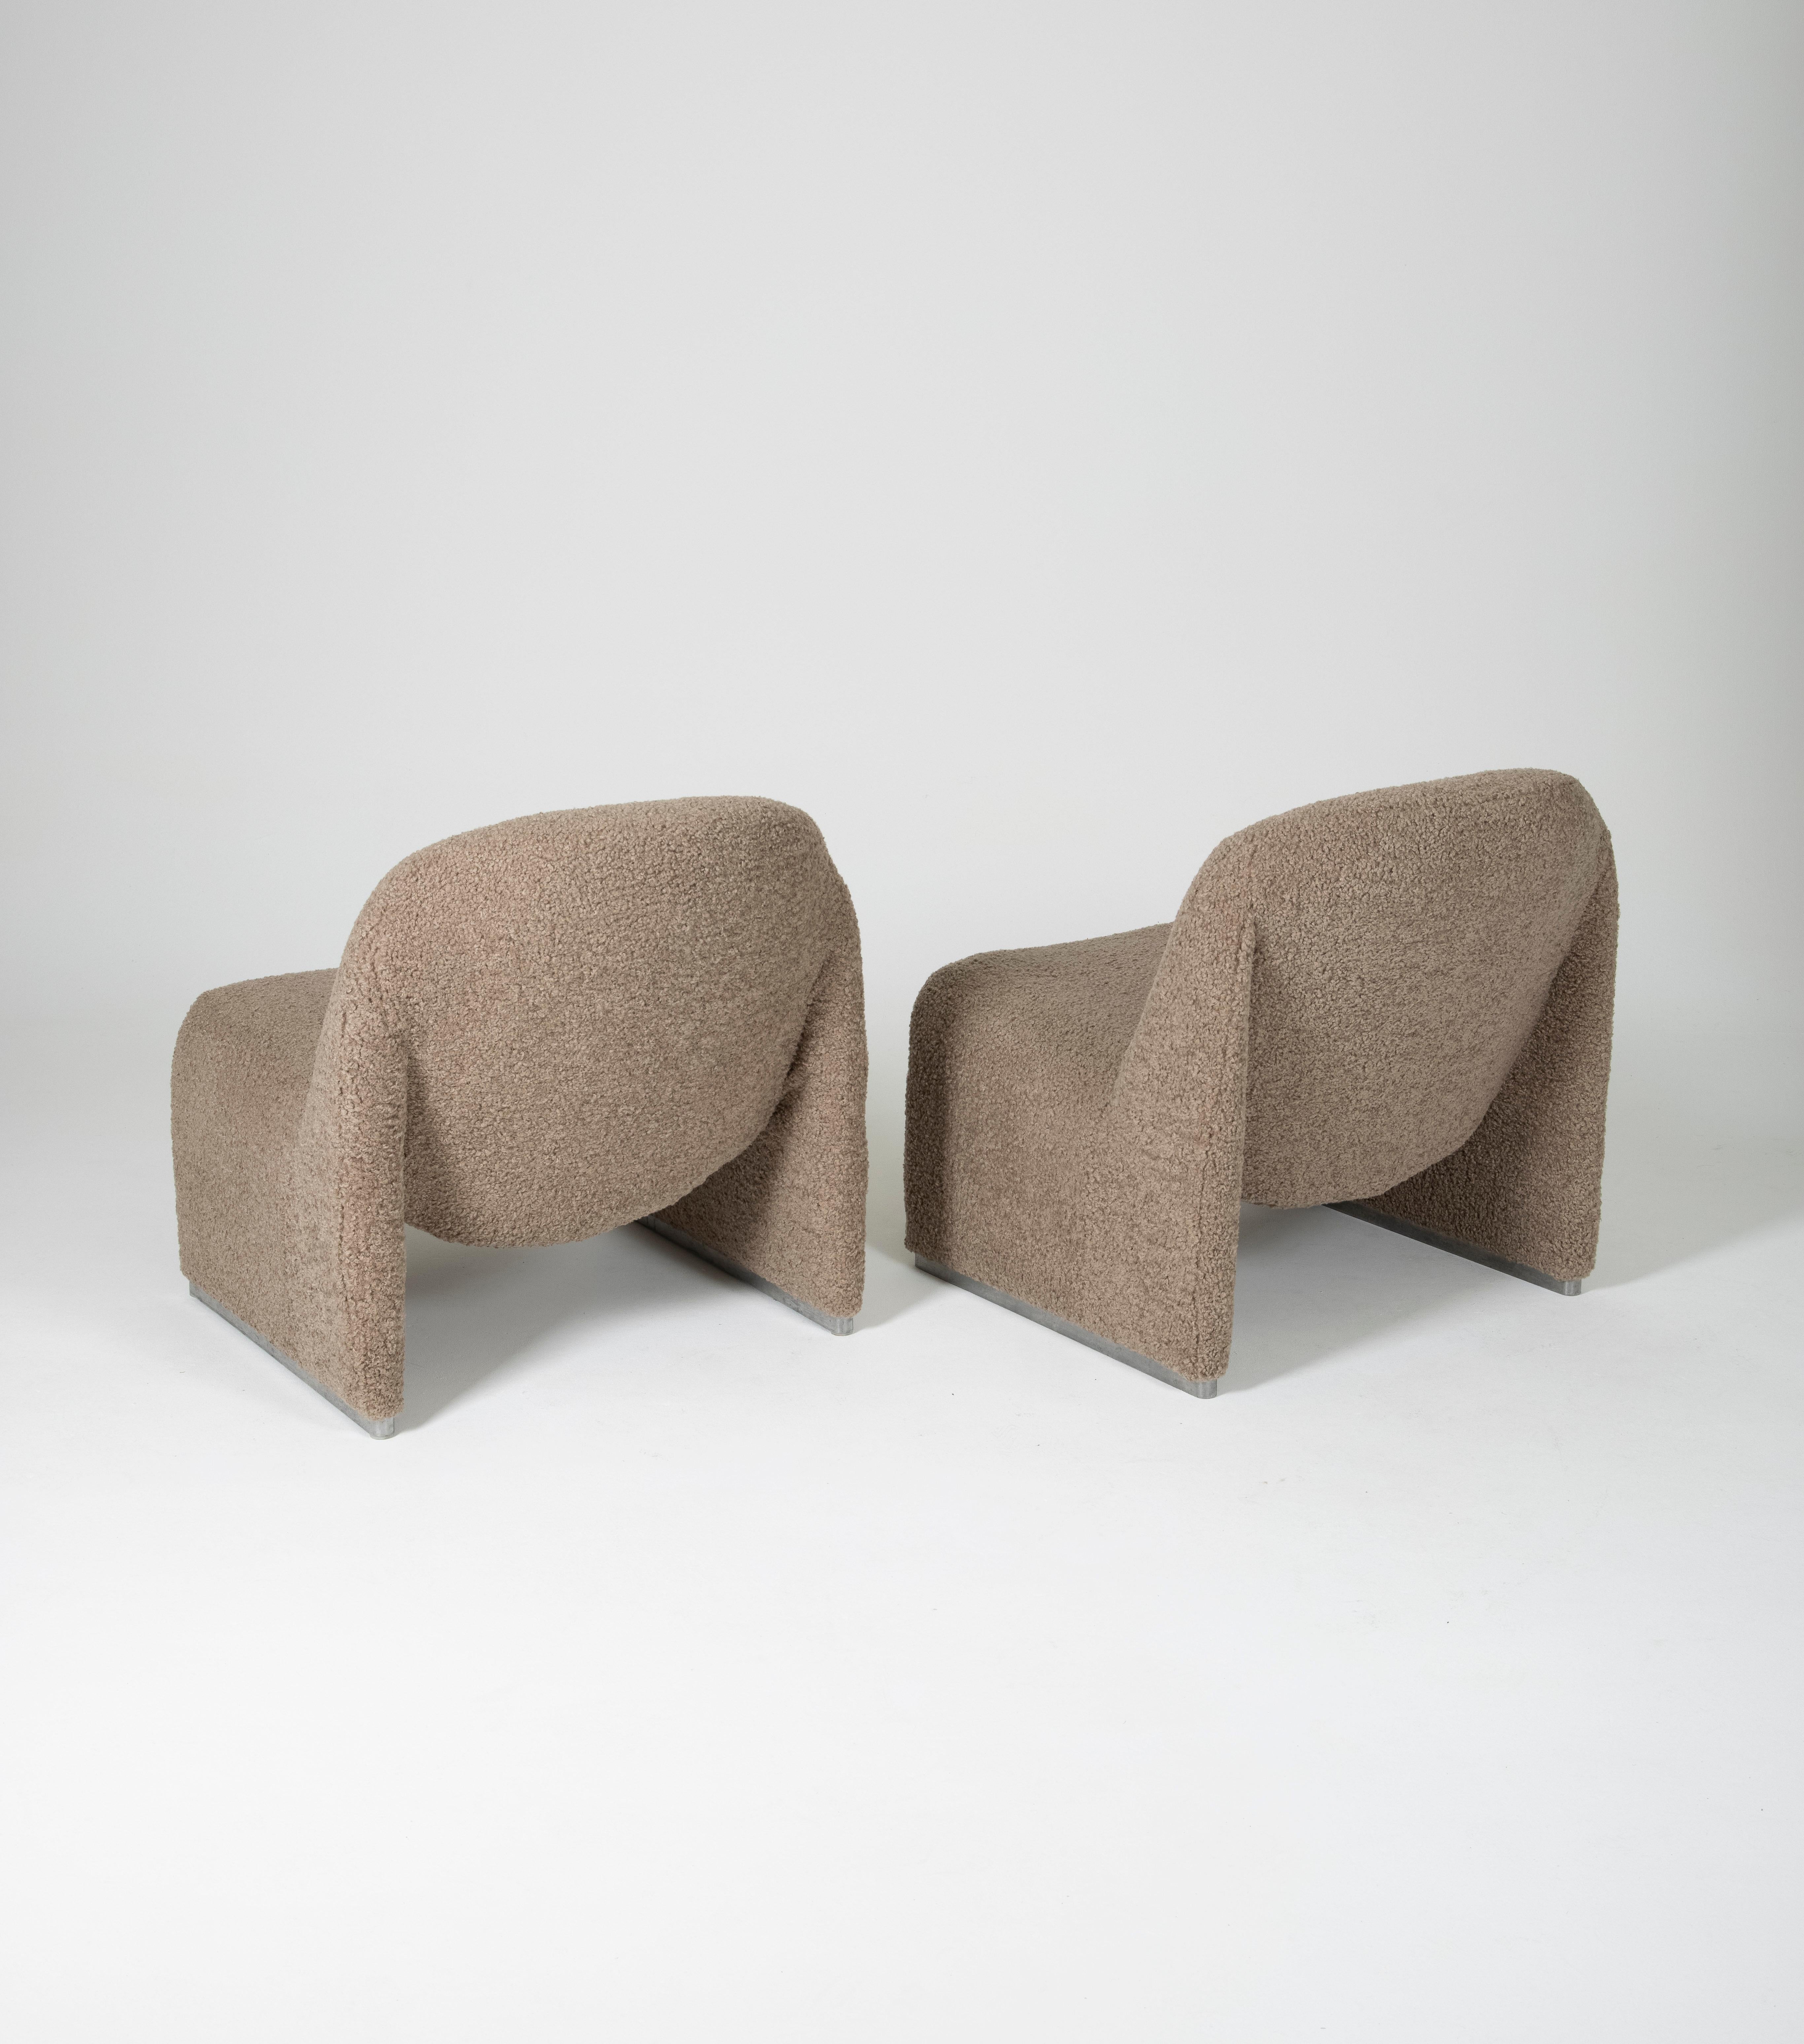 European Pair of Alky Armchairs by Giancarlo Piretti for Artifort, 1970s